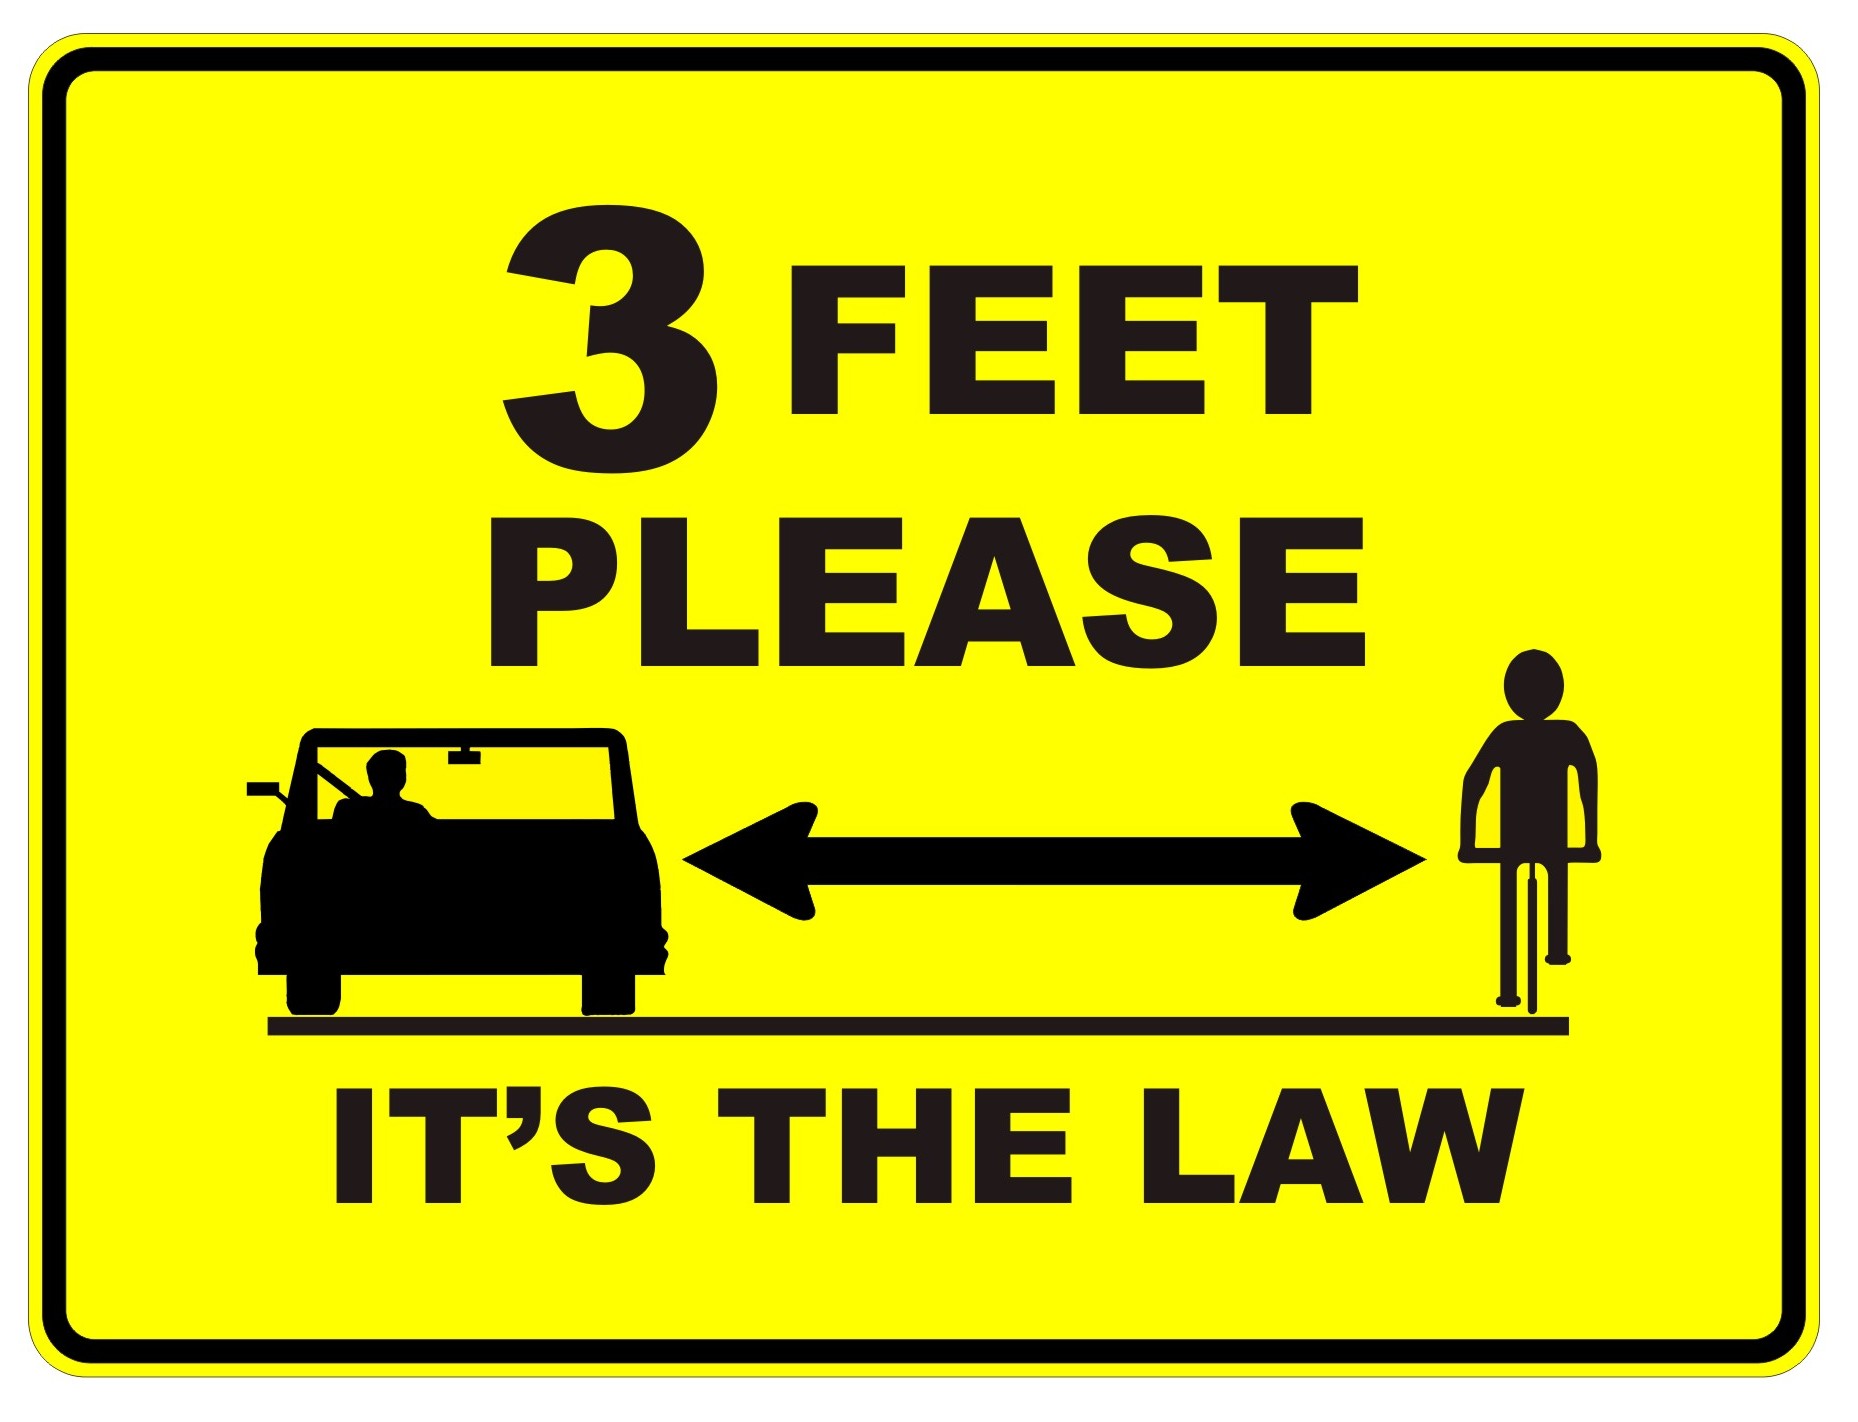 Many states say 3 feet is a safe passing distance, but Pennsylvania says it's 4 feet.